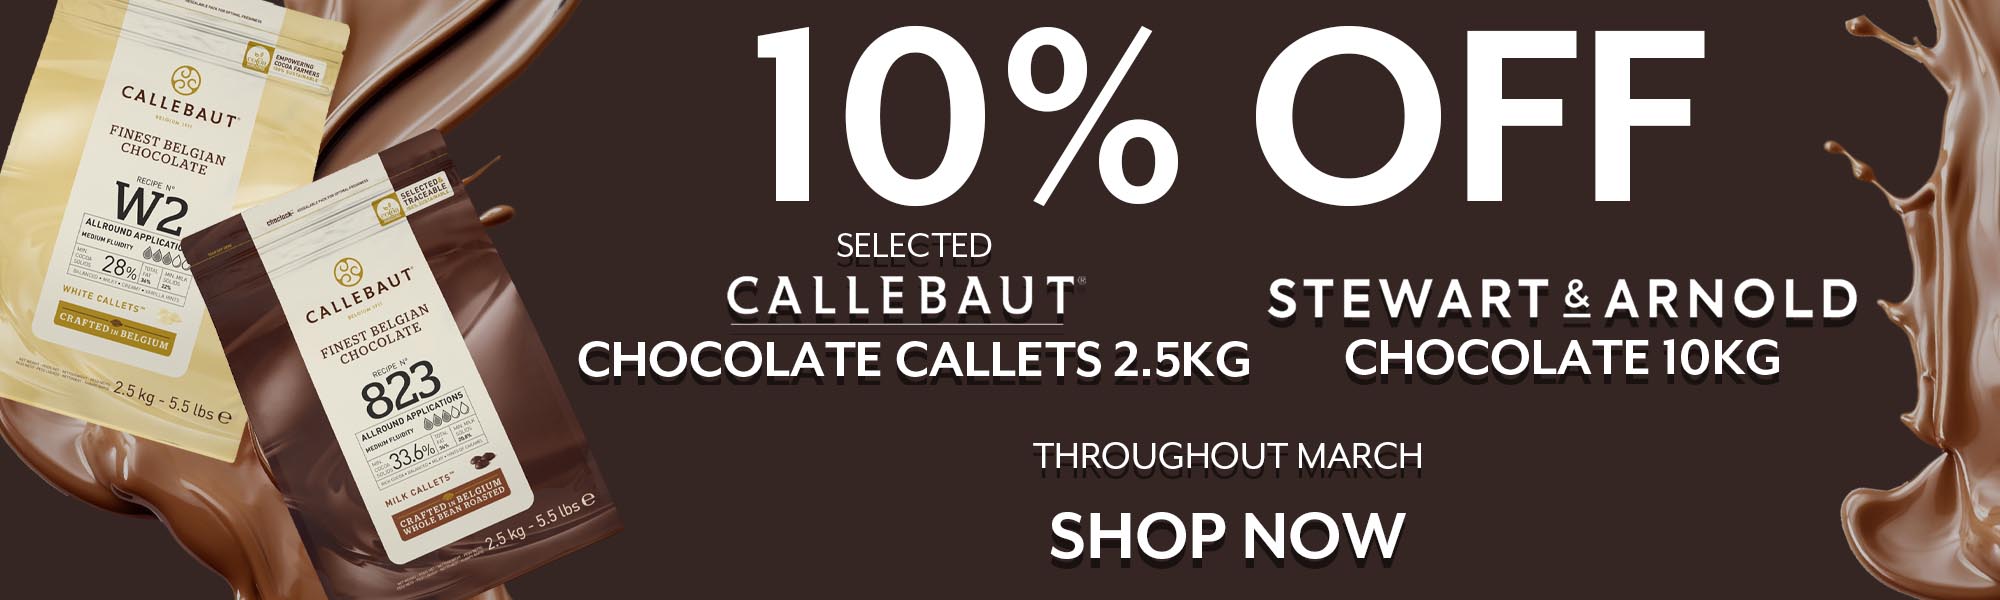 10% off selected 2.5kg callebaut chocolate callets and 10kg stewart & arnold chocolate